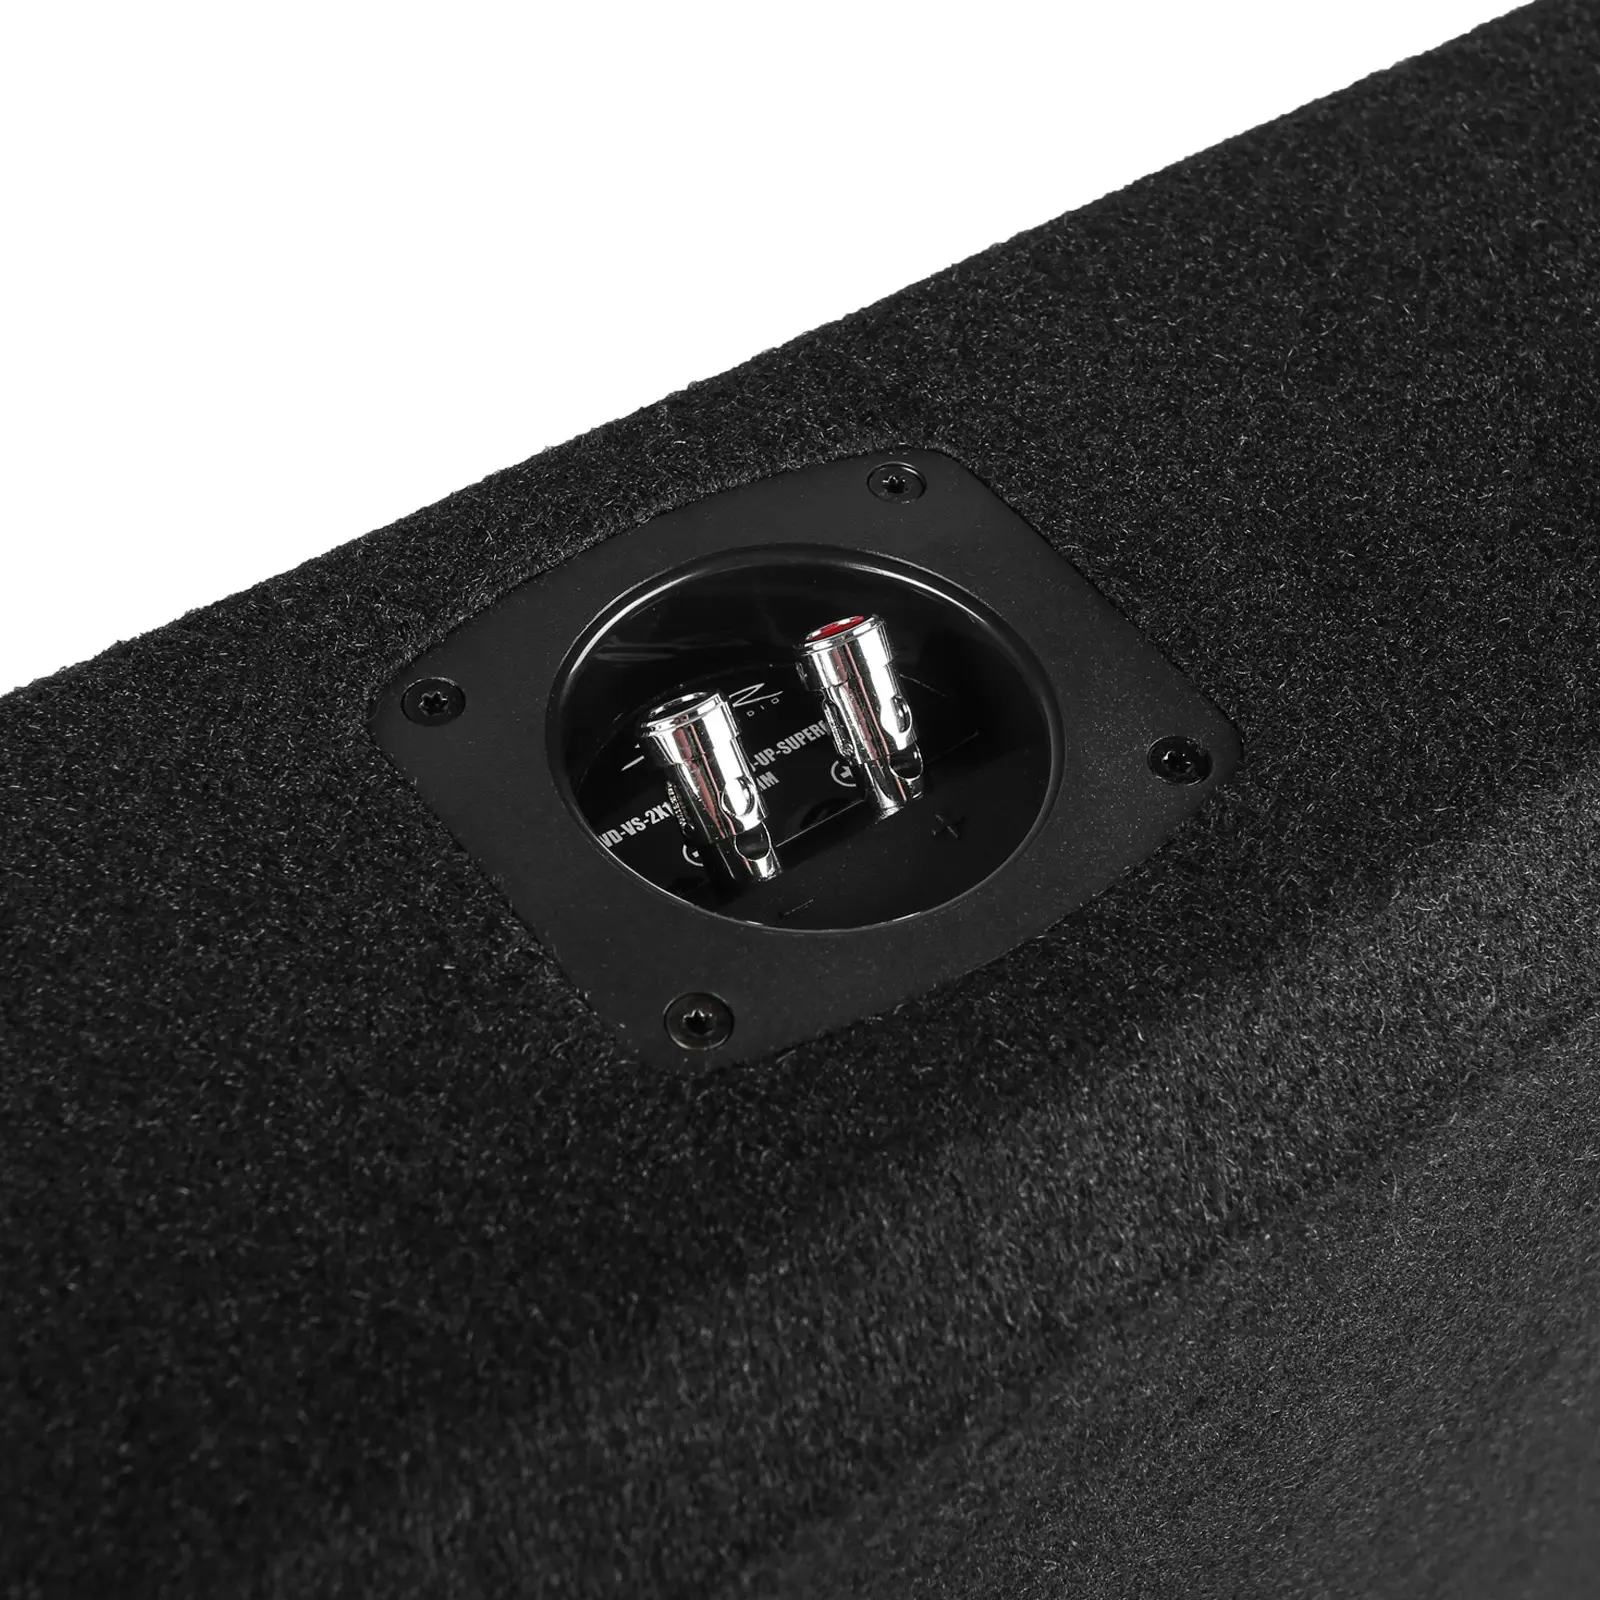 Dual 10" 1,600W Max Power Loaded Subwoofer Enclosure Compatible with 2015-2024 Ford F-150 Super Crew Cab Trucks #5